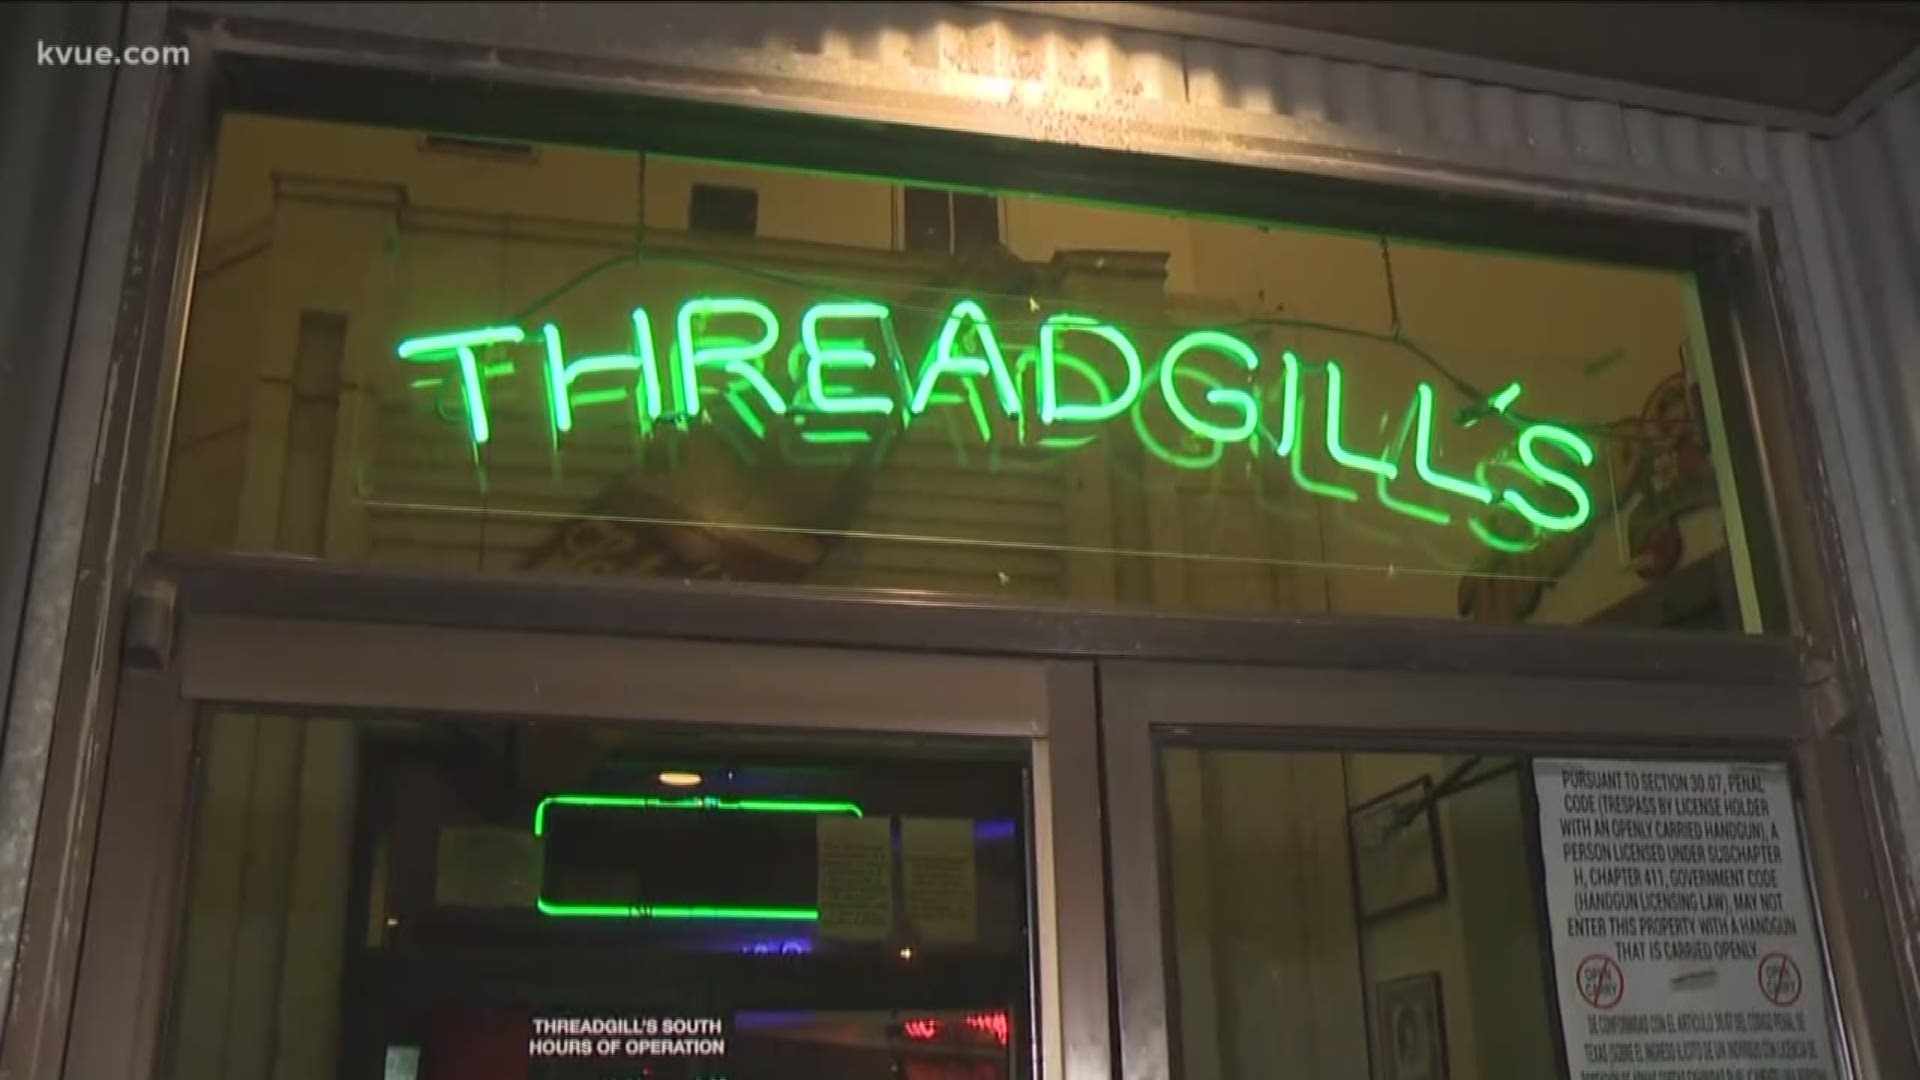 After more than 20 years on Riverside Drive, Threadgill's closed for good on Sunday.